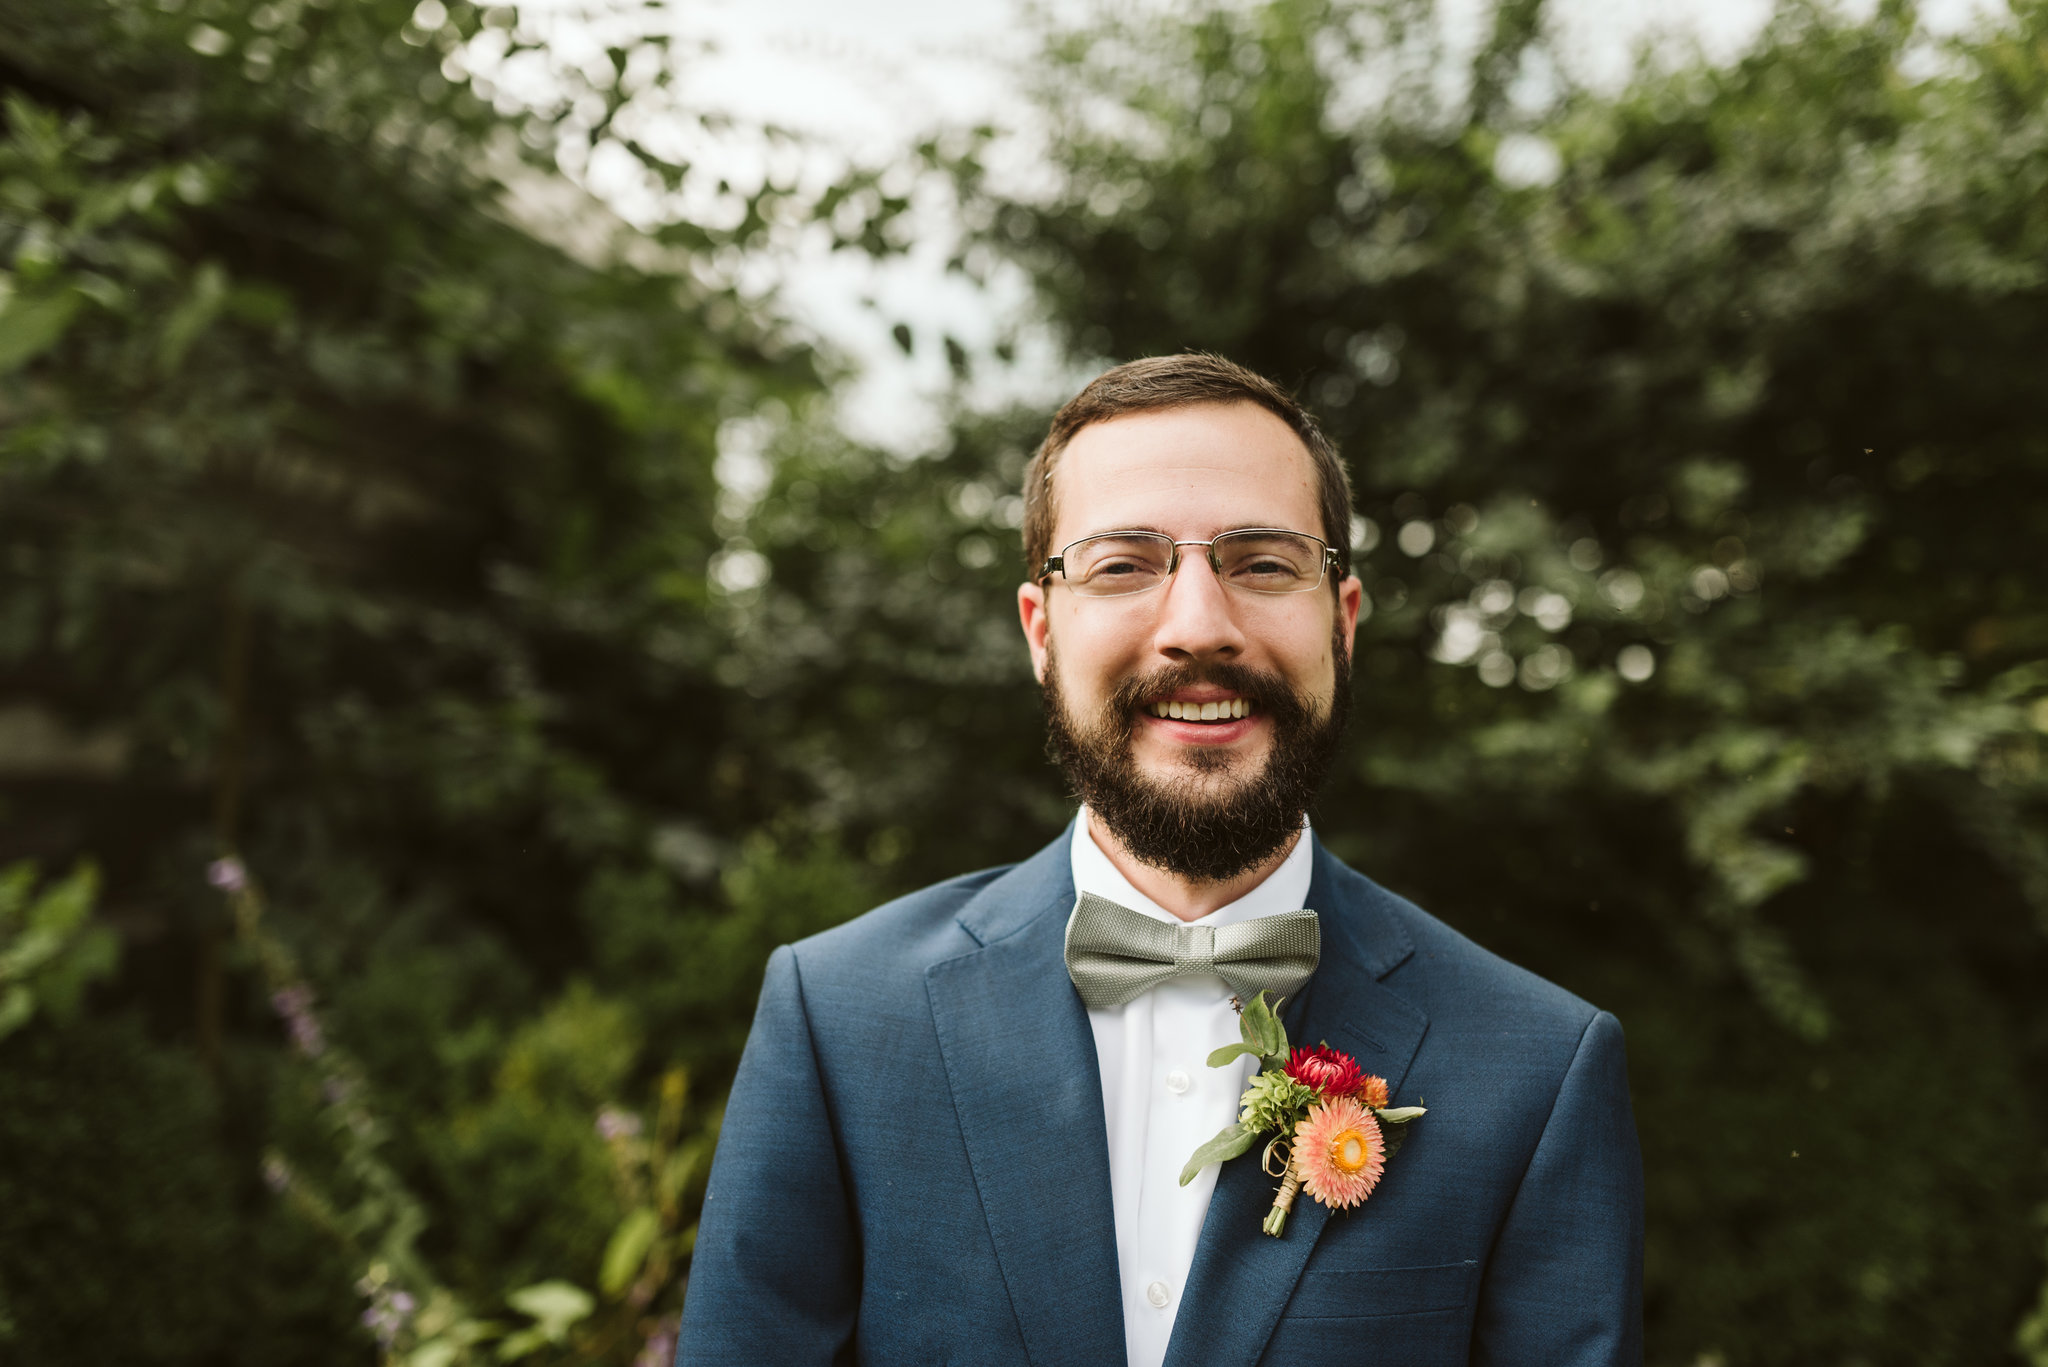 Rocklands Farm, Maryland, Intimate Wedding, Baltimore Wedding Photographer, Sungold Flower Co, Rustic, Romantic, Barn Wedding, Portrait of Groom Smiling Before Ceremony